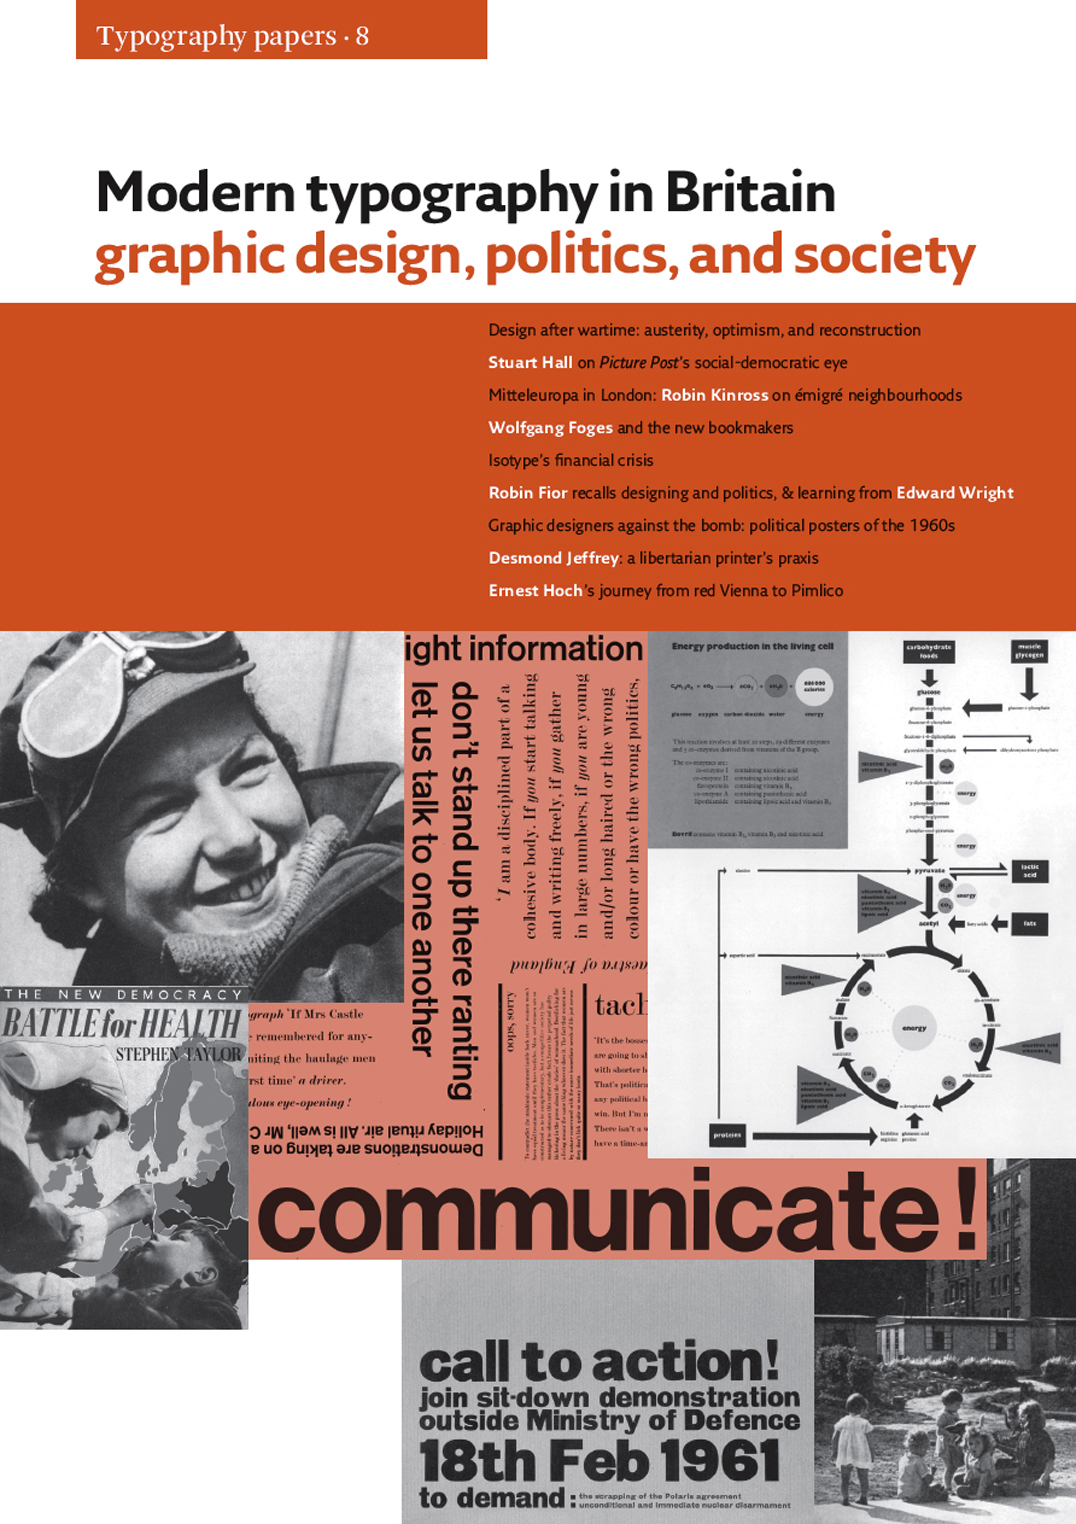 Modern typography in Britain: graphic design, politics, and society (Typography papers 8)